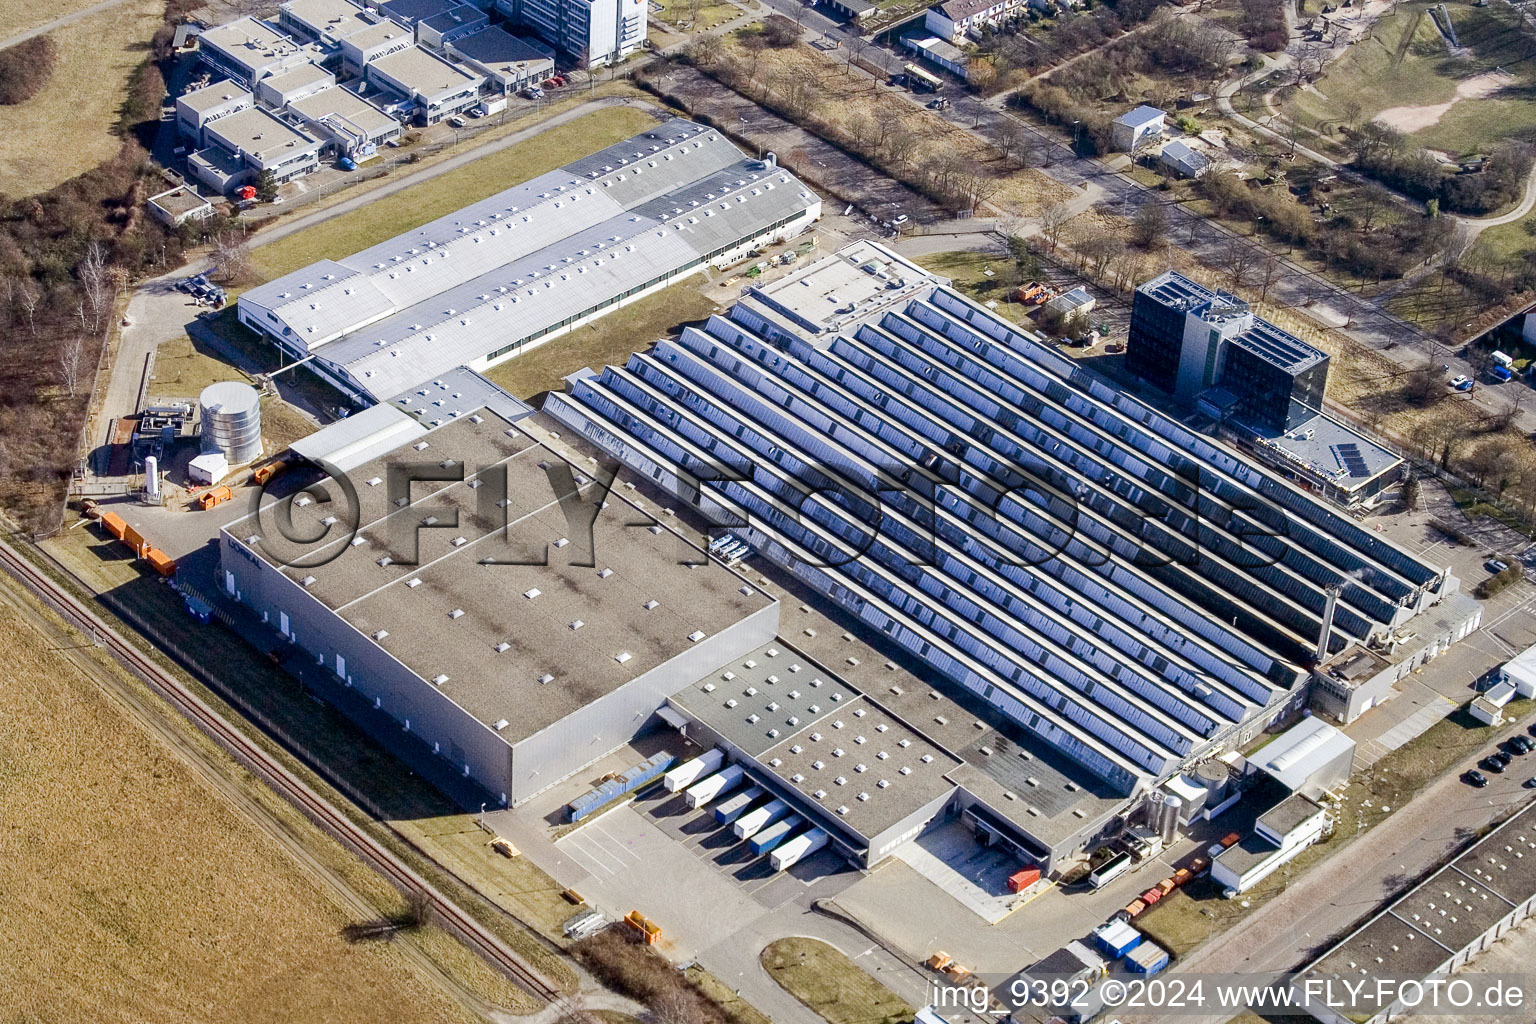 Aerial view of Building and production halls on the premises of the chemical manufacturers L'OREAL Produktion Deutschland GmbH & Co. KG in the district Nordweststadt in Karlsruhe in the state Baden-Wurttemberg, Germany